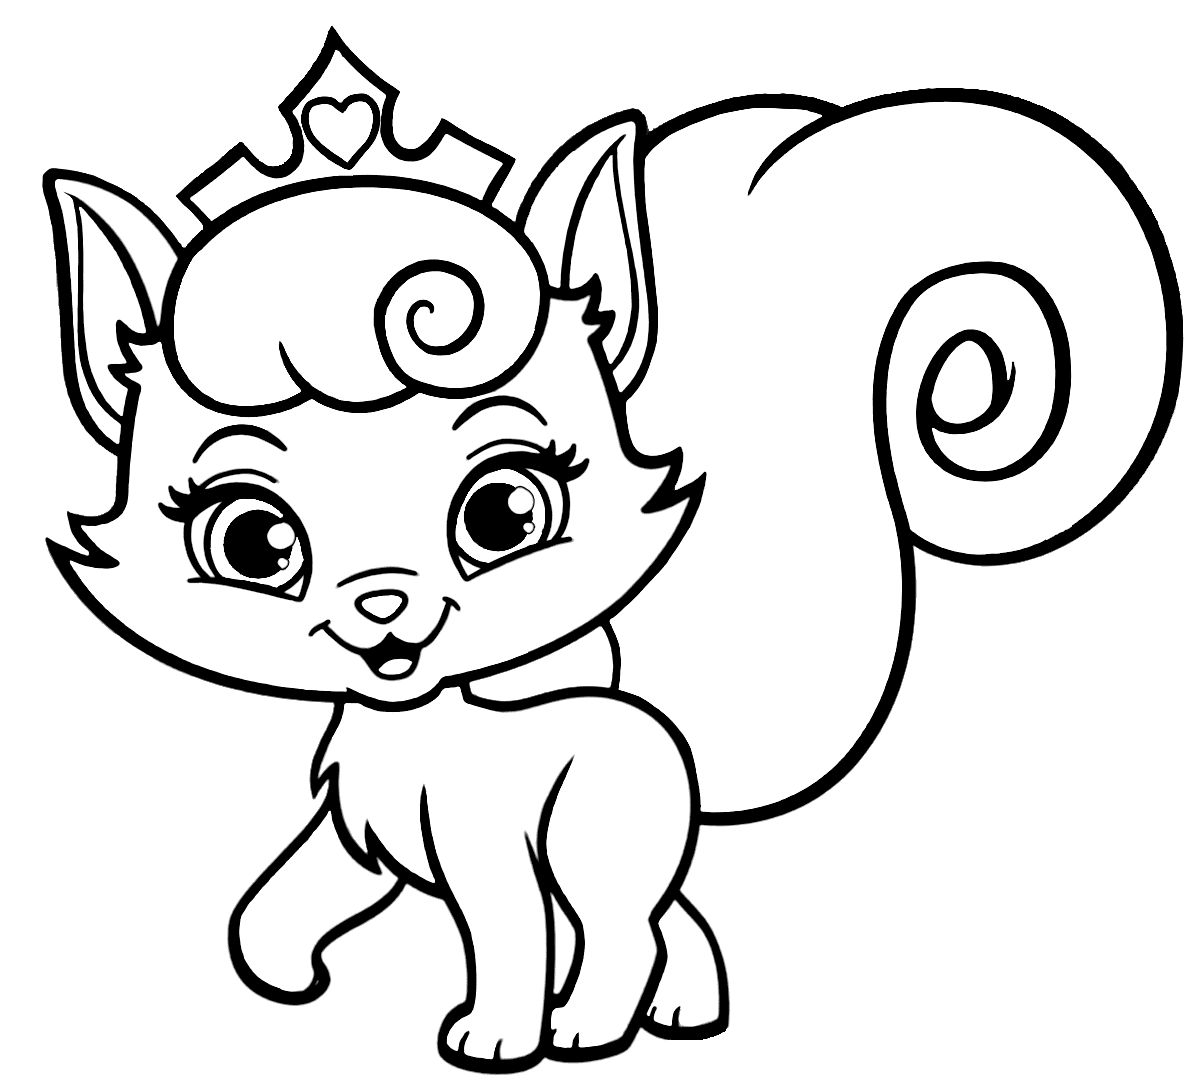 Kitten Coloring Pages Free Online For kids